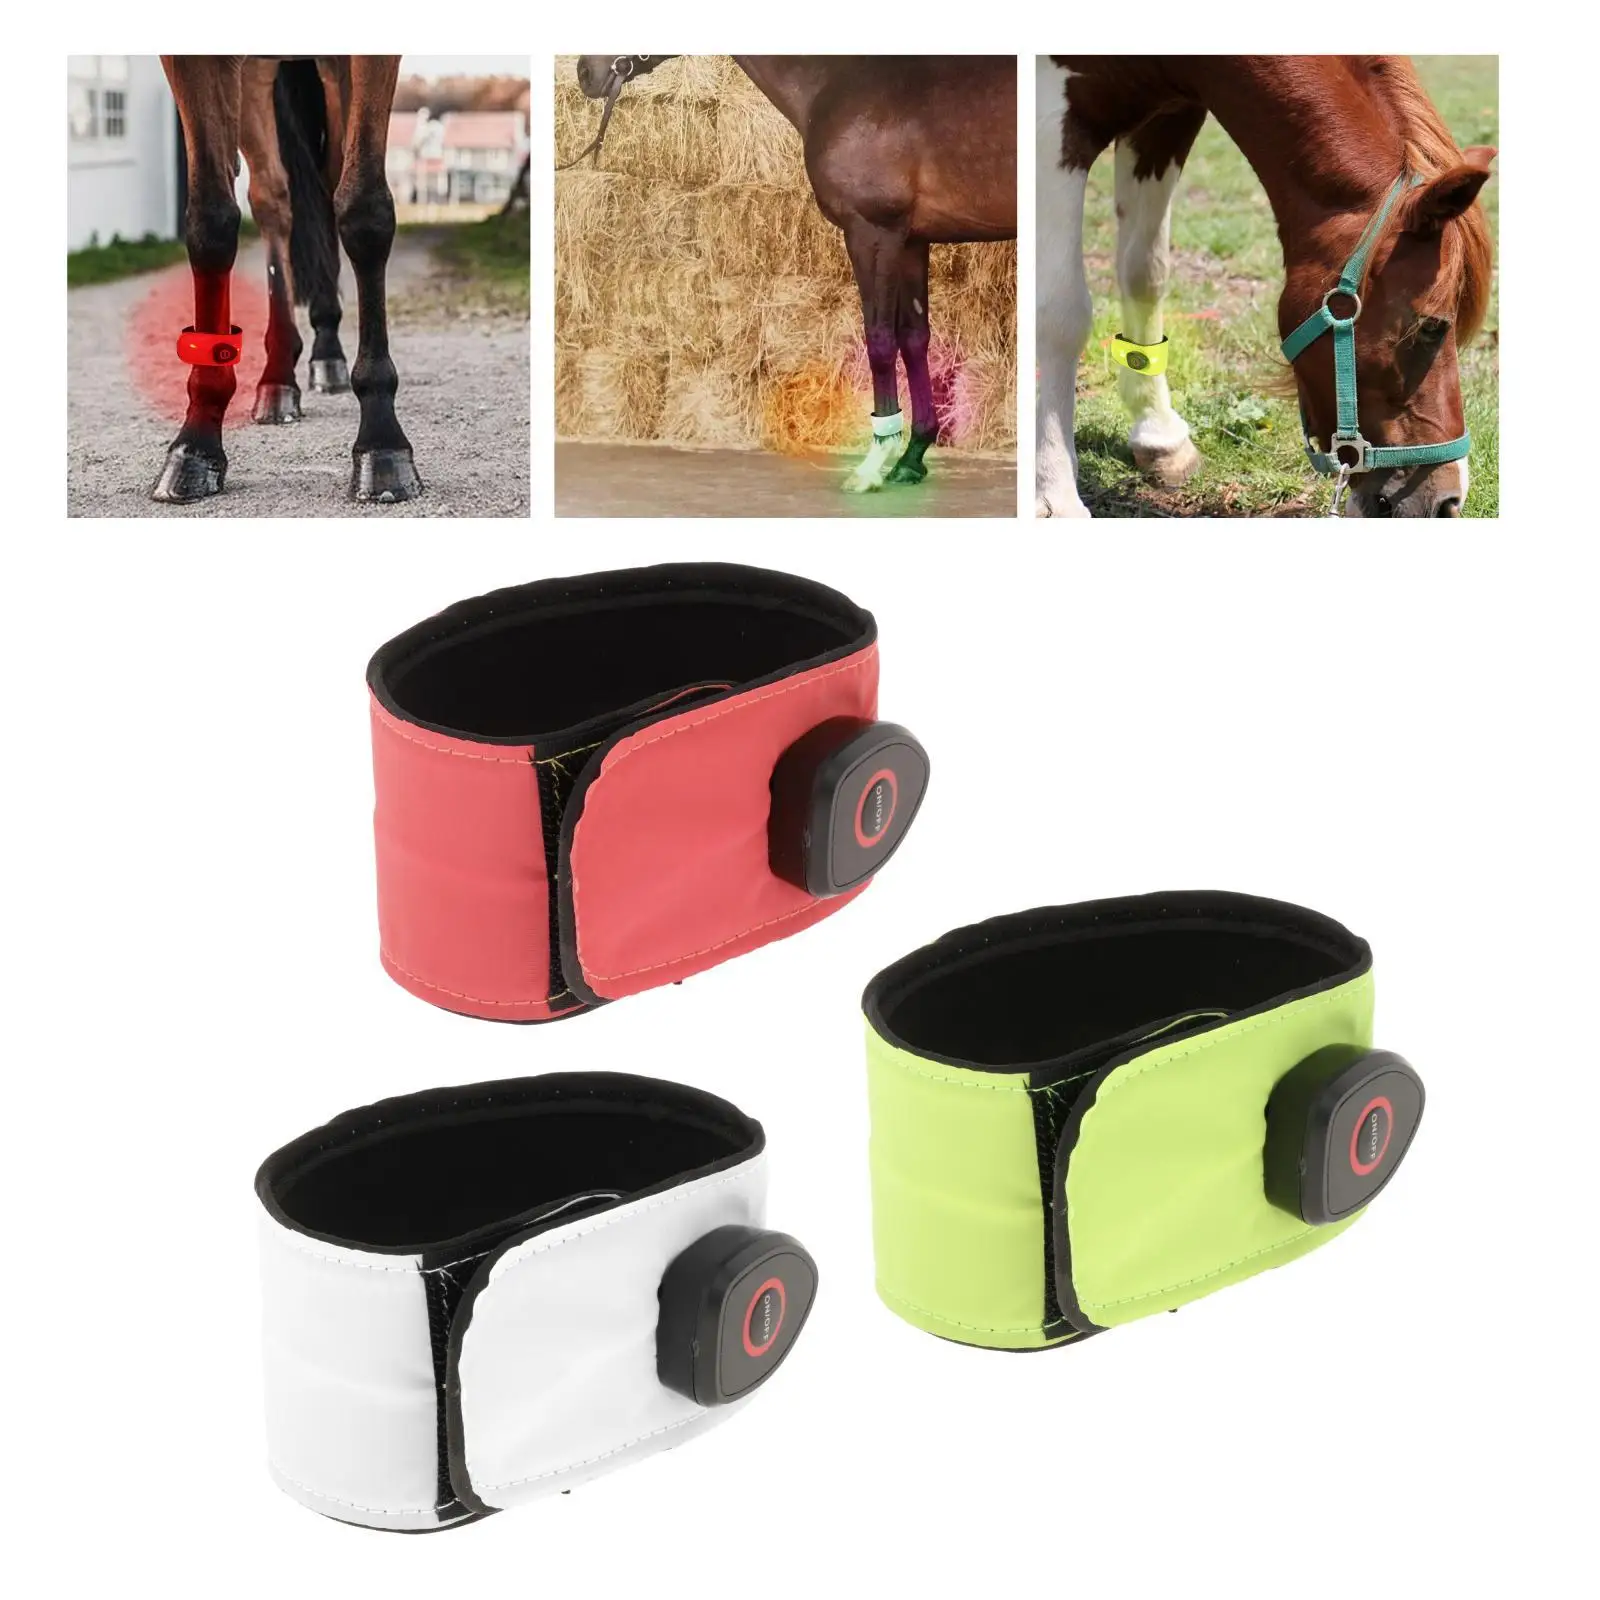 Reflective Horse LED Ankle Straps Safety Leg Protection Belt Straps Legging Equestrian Sport for Outdoor Riding Jumping